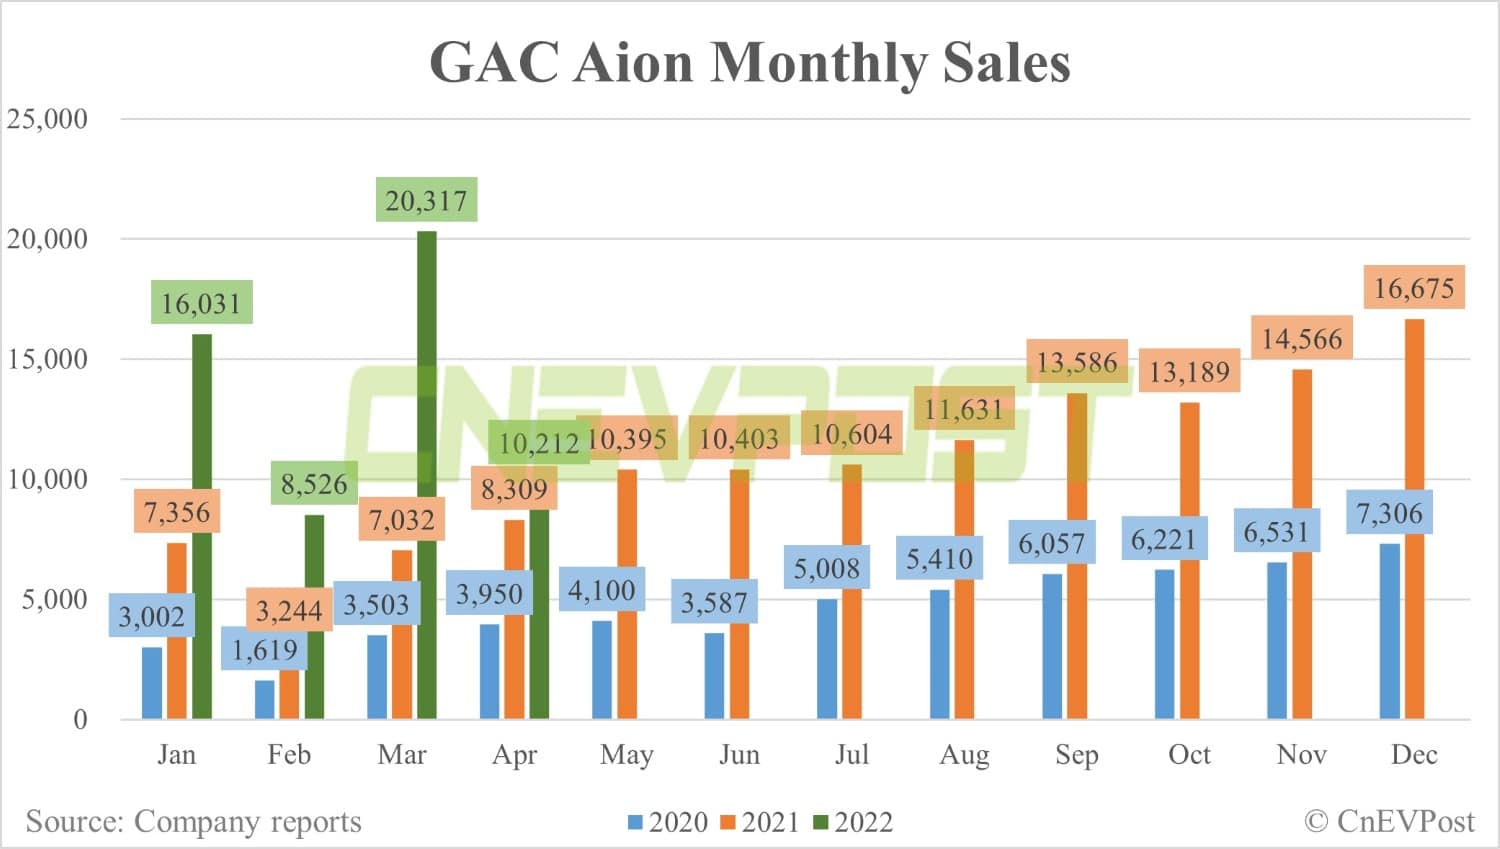 GAC Aion sells 10,212 units in April, down 50% from March-CnEVPost